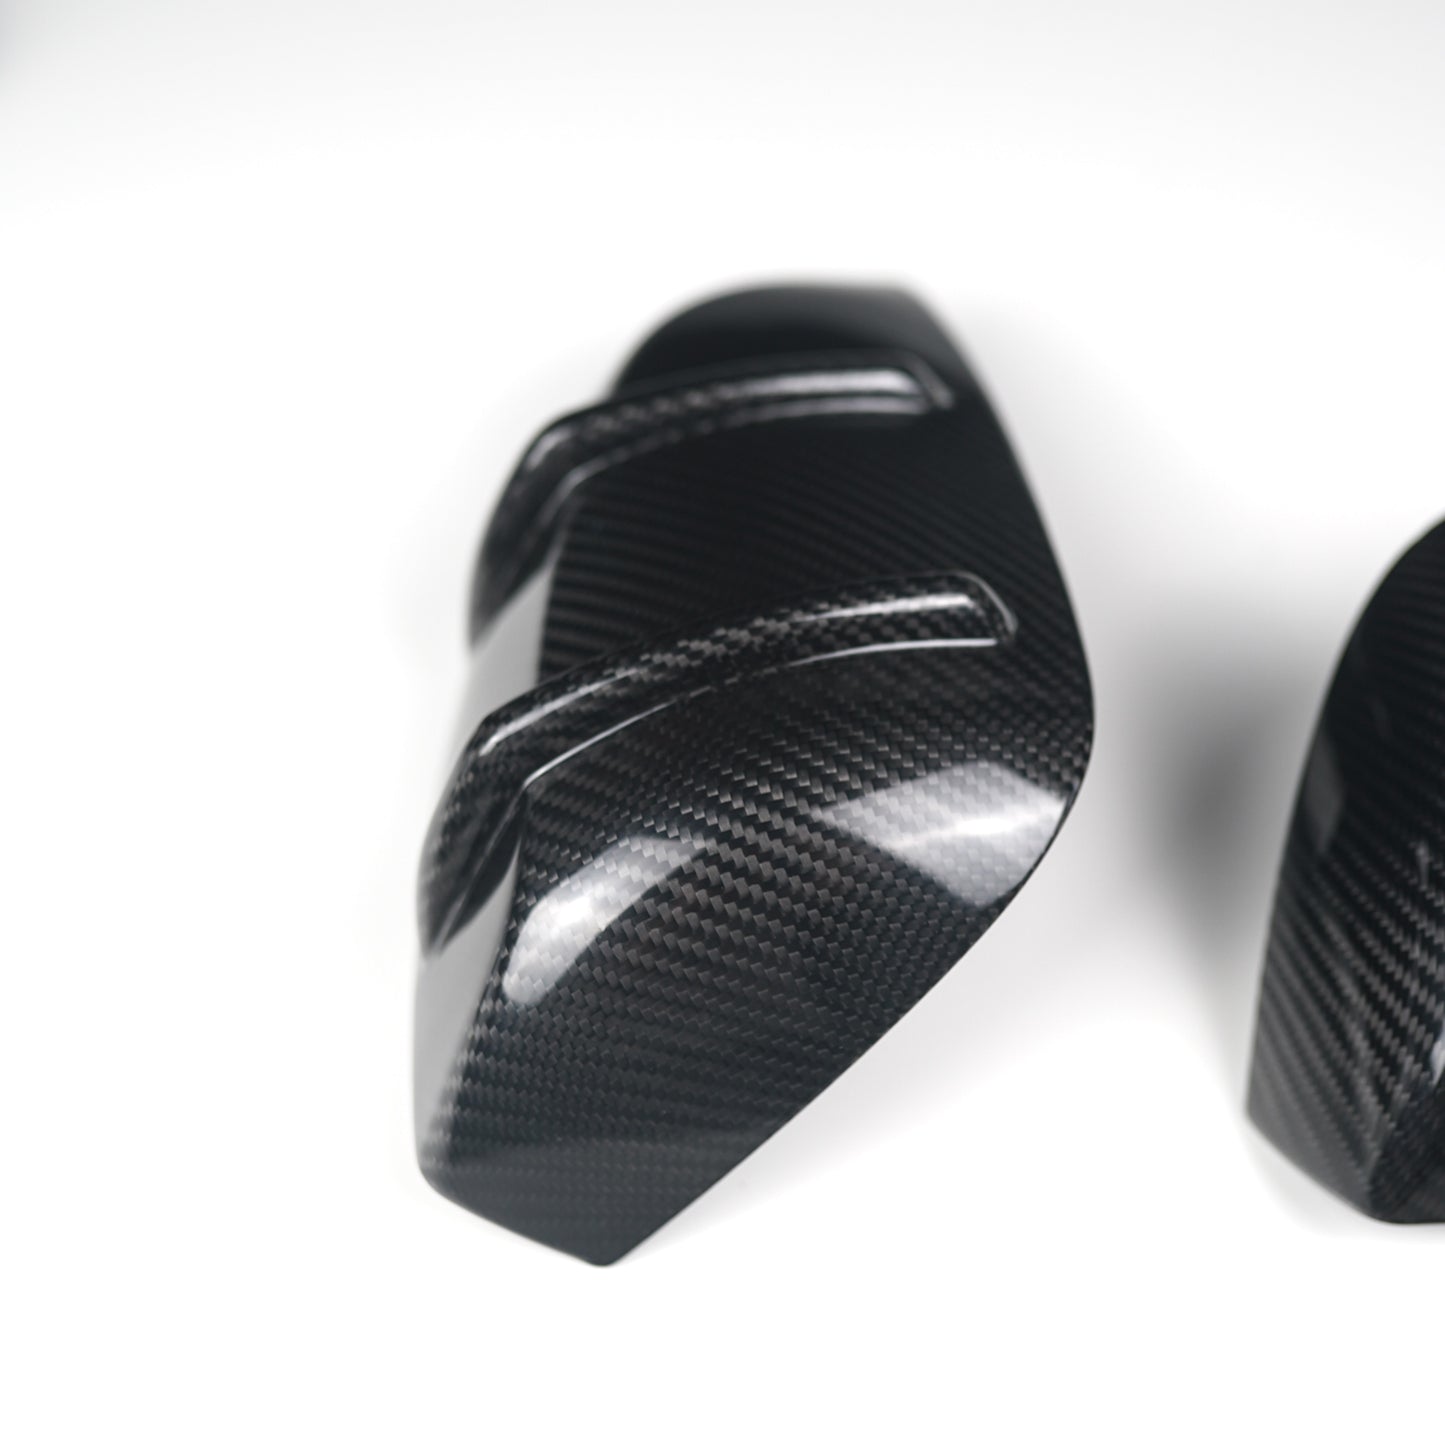 JDMuscle Tanso RAR Style Carbon Fiber Side Mirror Covers/Replacement with Turn Signal - 2015+WRX/STI